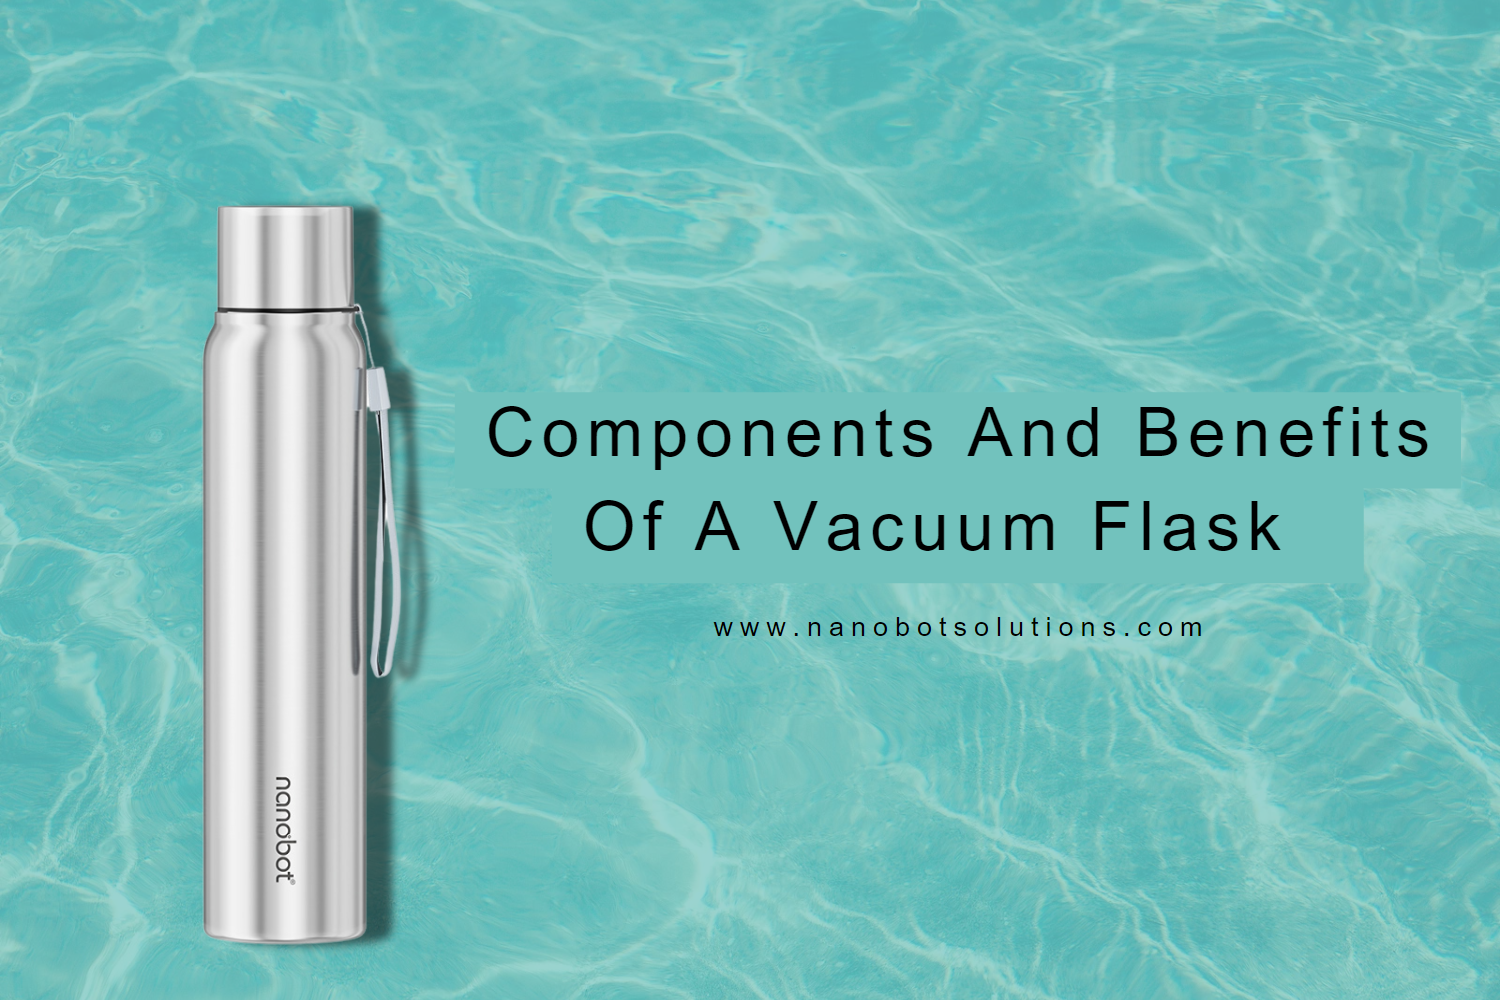 Components and Benefits of a Vacuum Flask